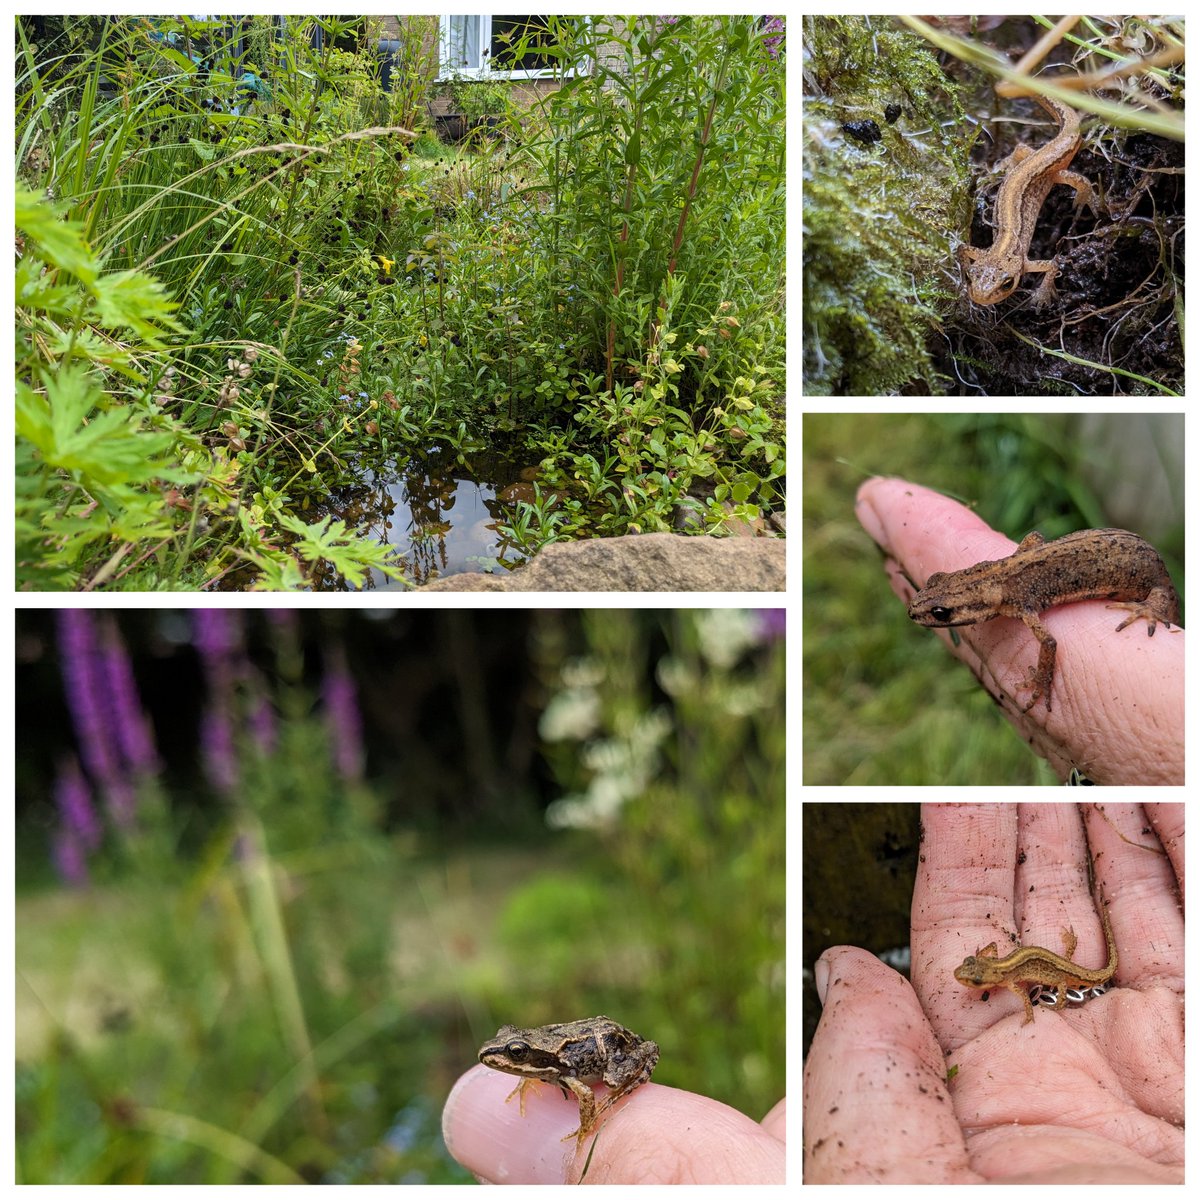 Makes it all worthwhile to find juvenile amphibians in the garden, ponds are truly the best feature a garden can have #wildlifepond #amphibians